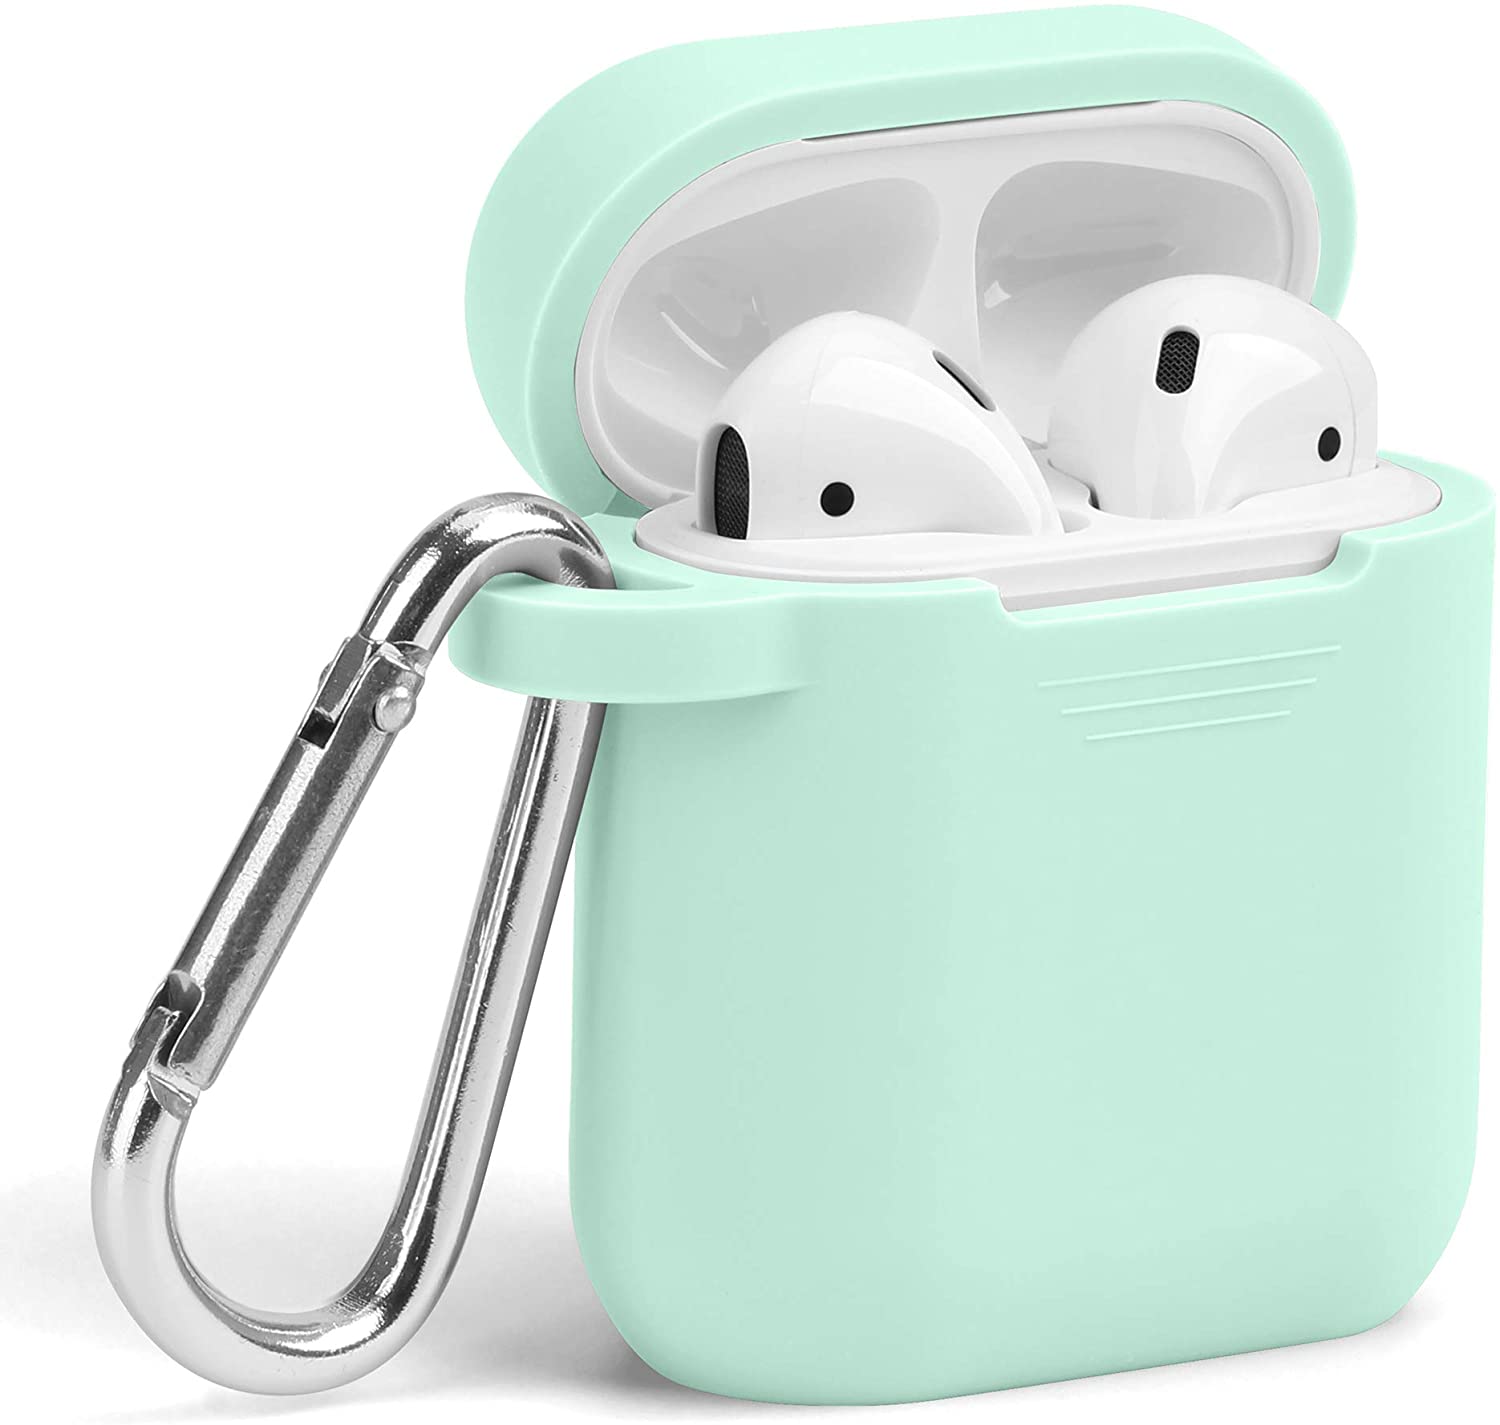 AirPods Case [Front LED Visible] GMYLE Silicone Protective Shockproof Earbuds Case Cover Skin with Keychain Kit Set Compatible for Apple AirPods 1 & 2 (Pastel Green) - image 1 of 8